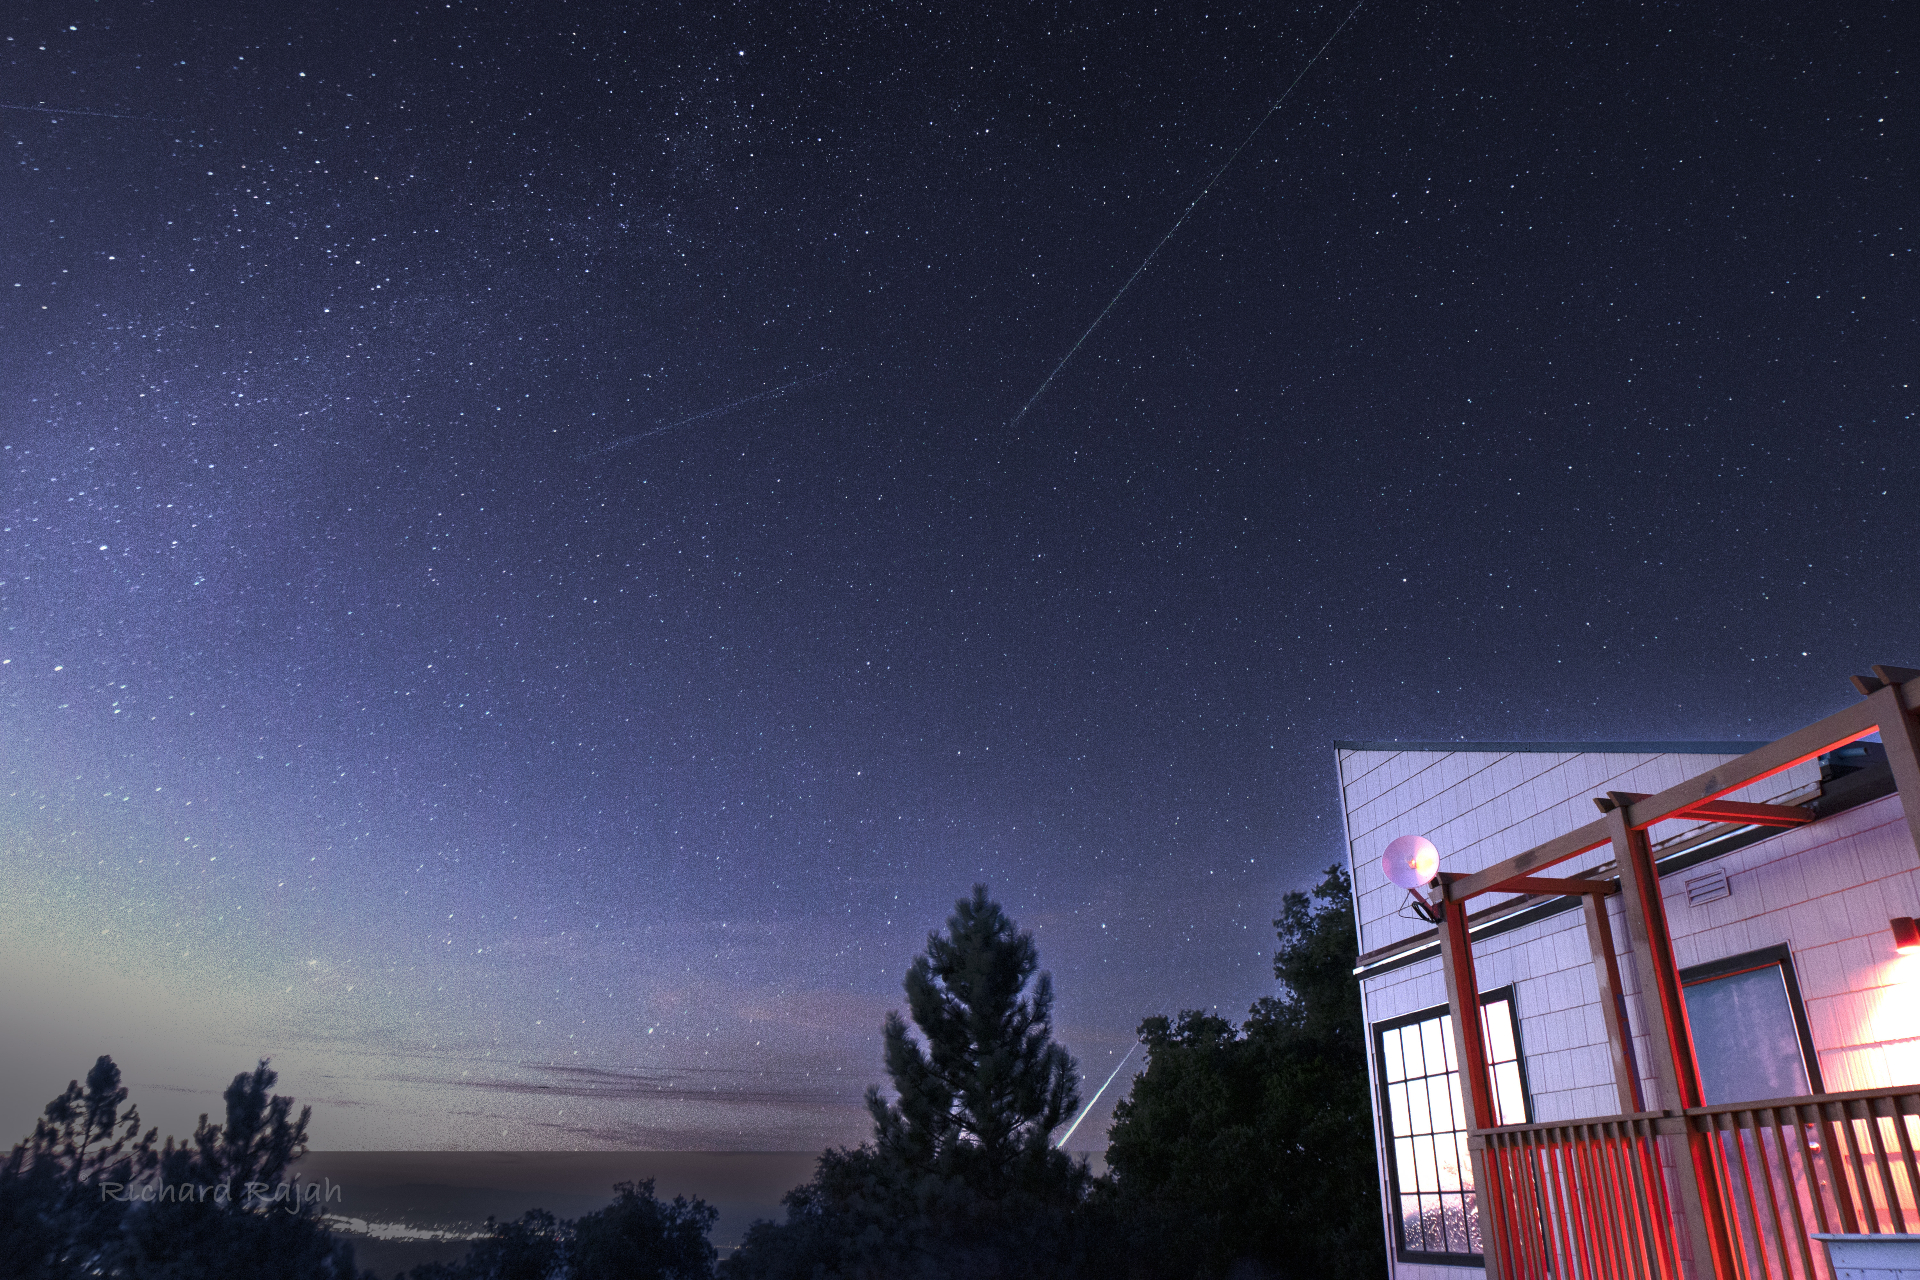 Meteors streak across the sky and a bright fireball streaks behind the trees in the lower part of the image.  A lighted building is to the right of the photo.